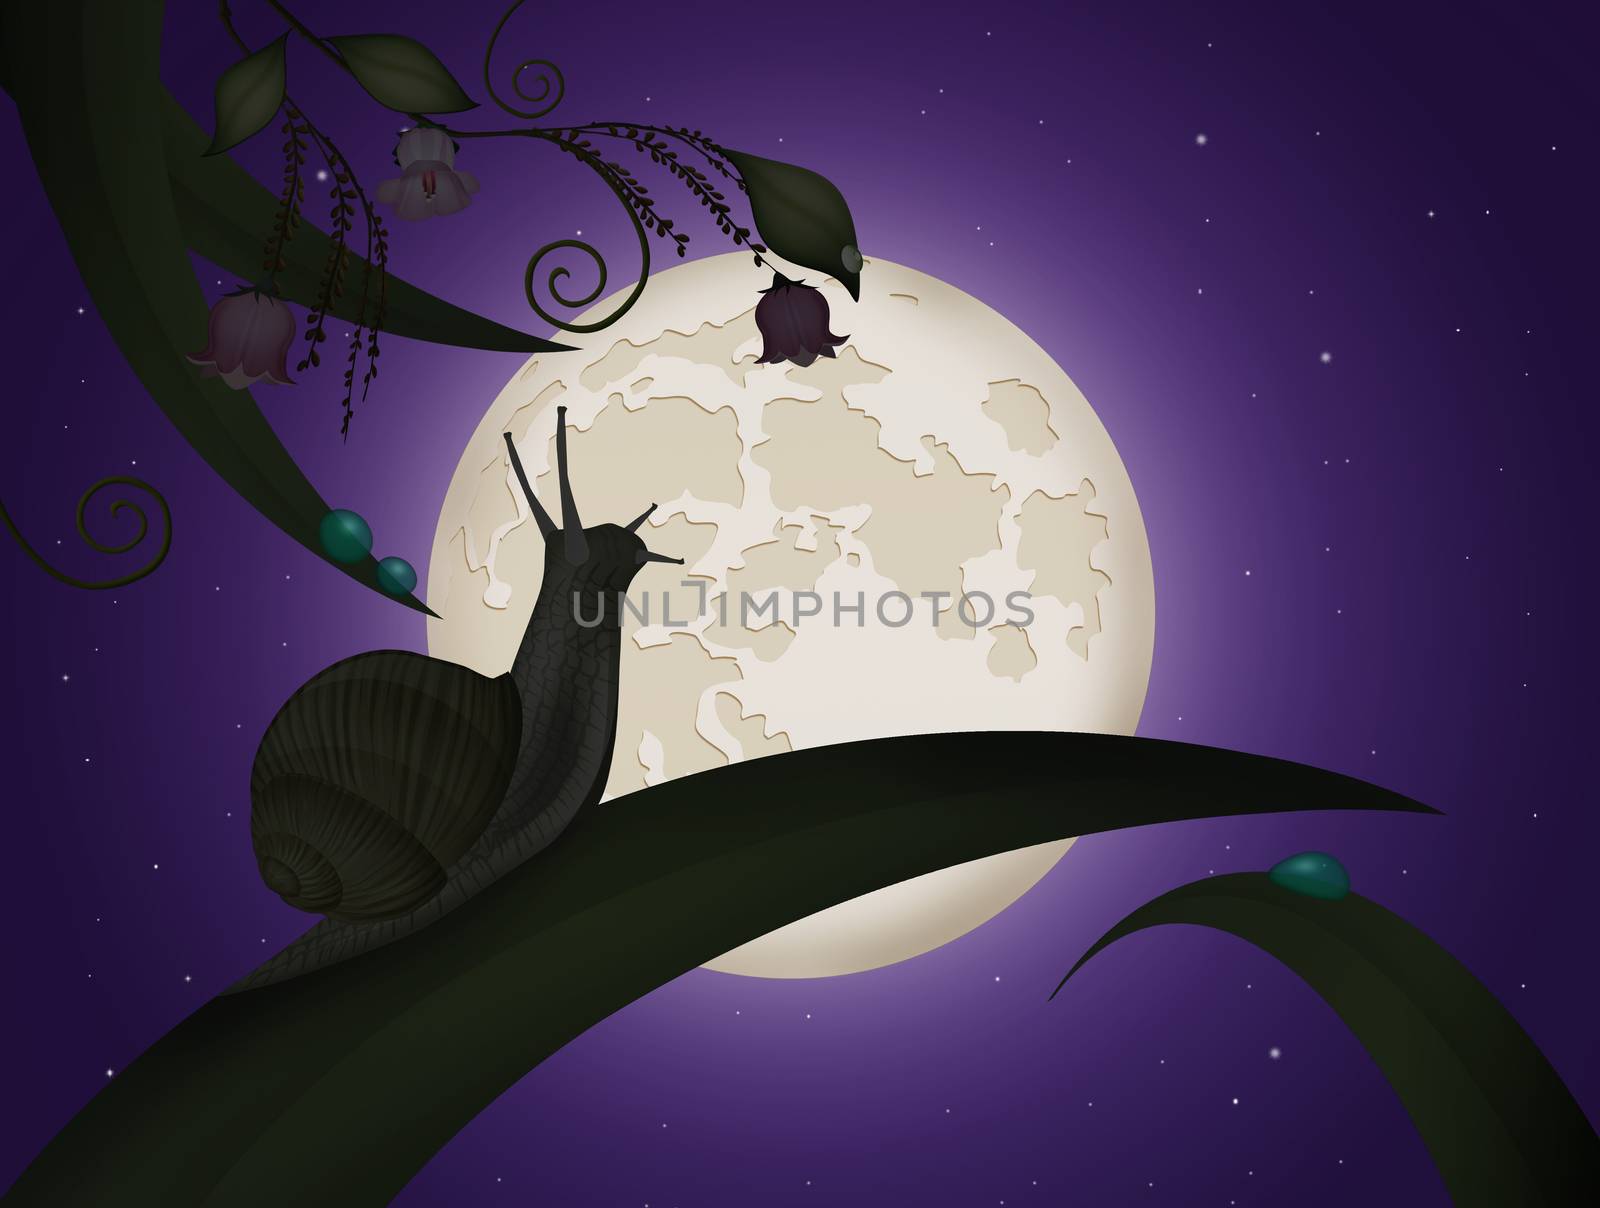 illustration of snail on leaf in the moonlight